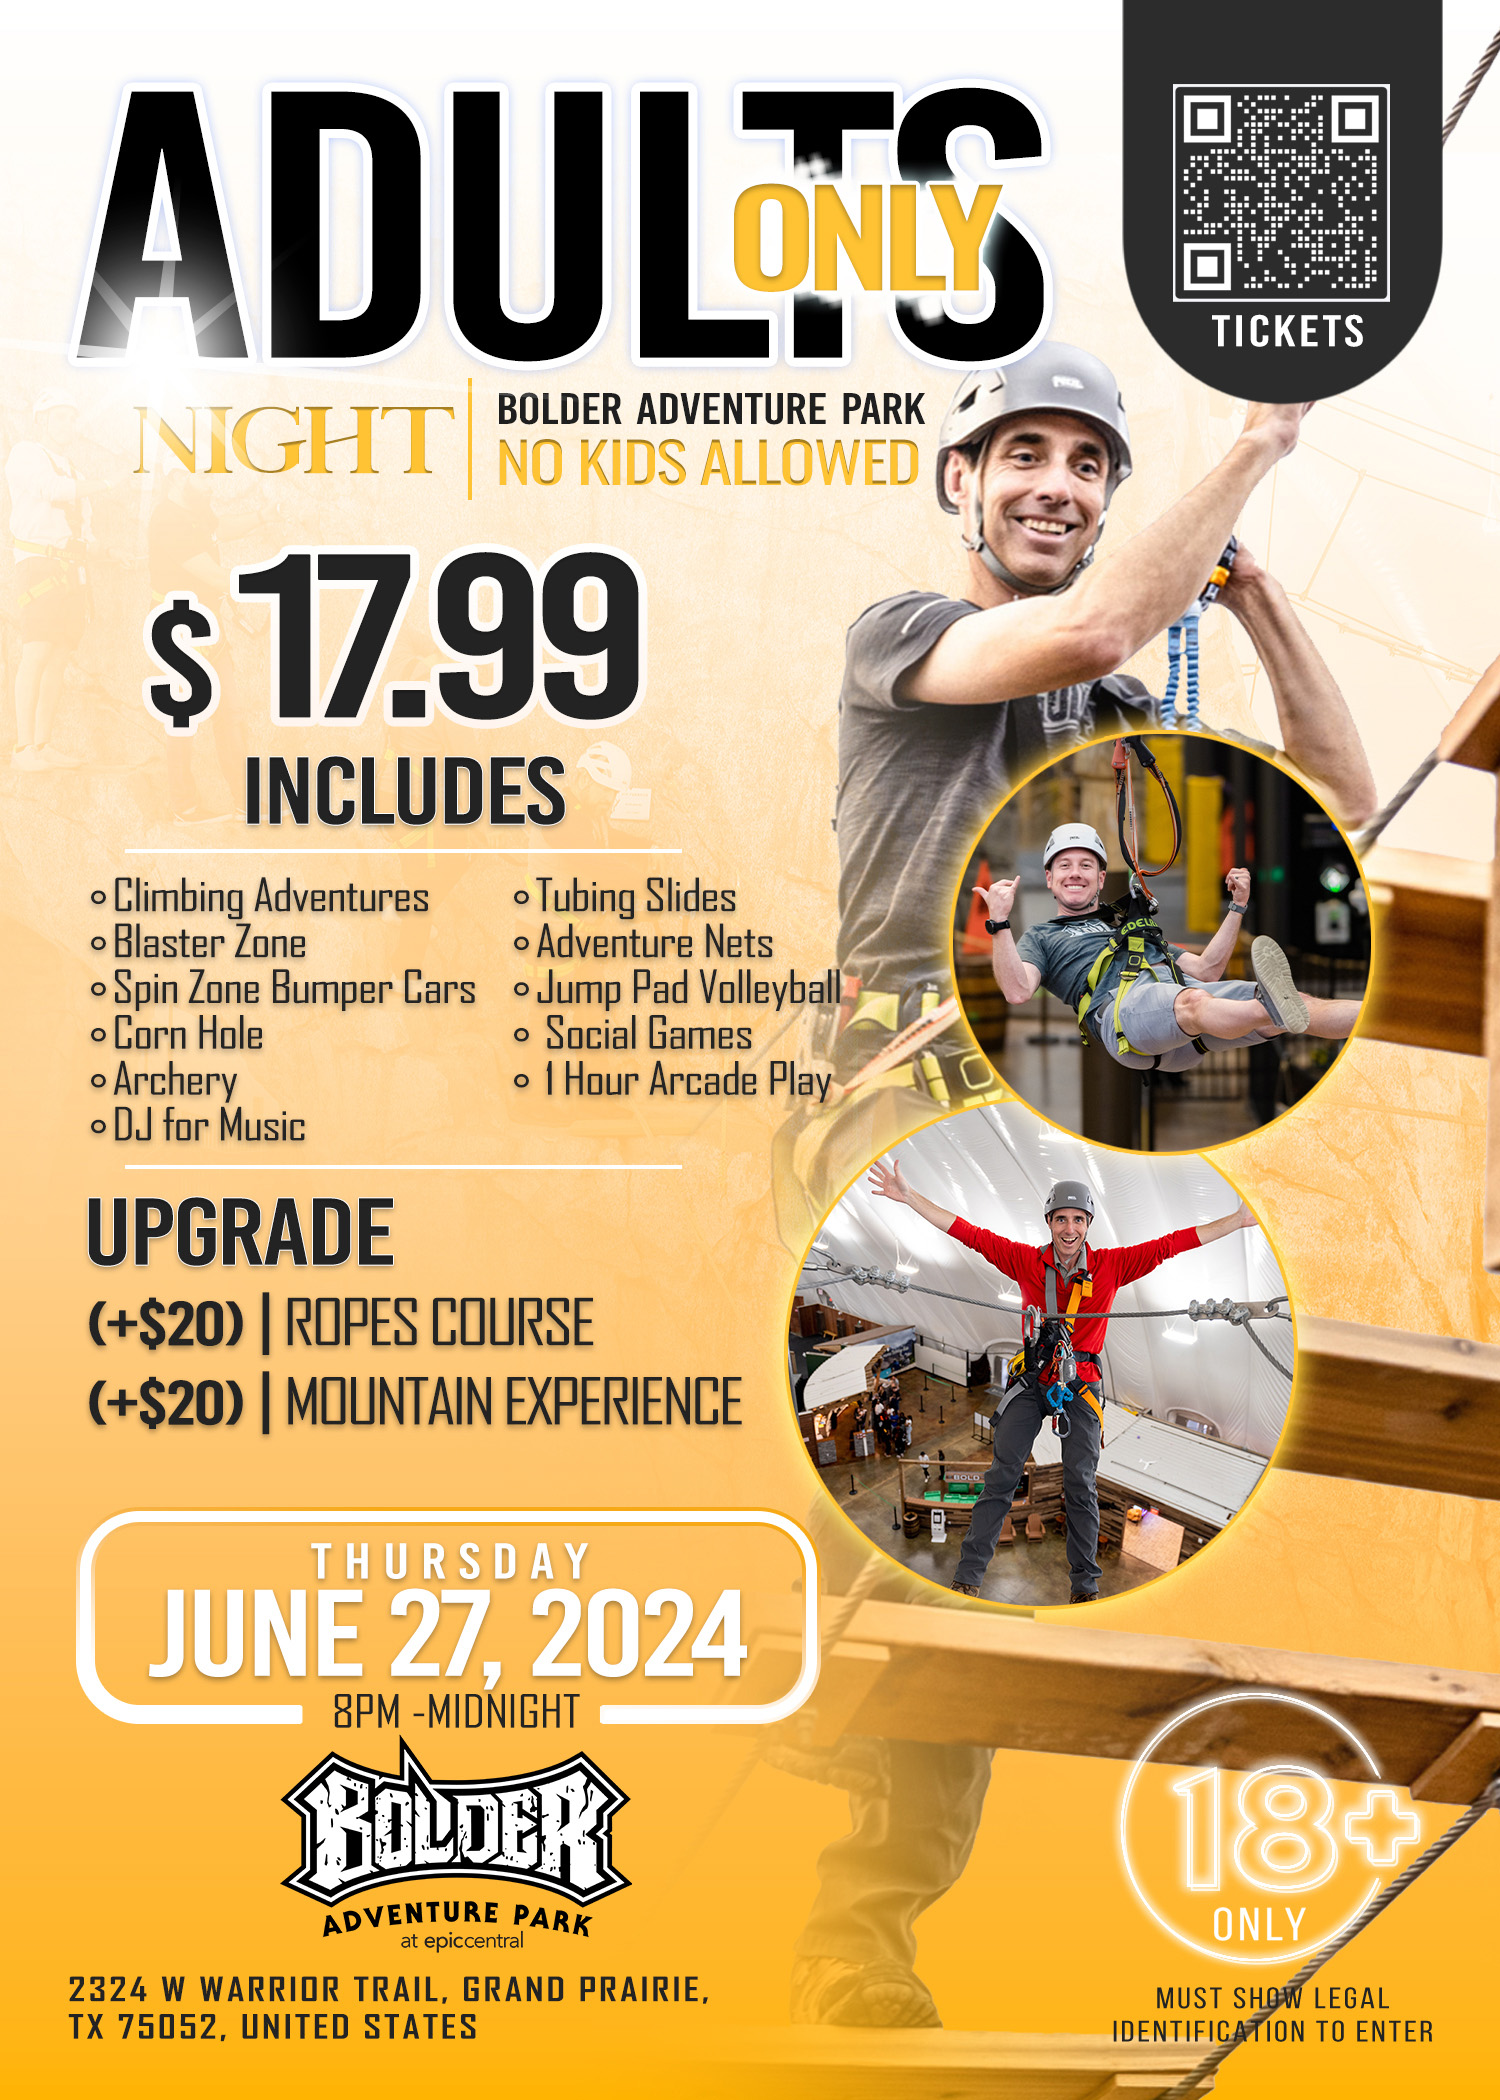 Adults Only Night at Bolder Adventure Park